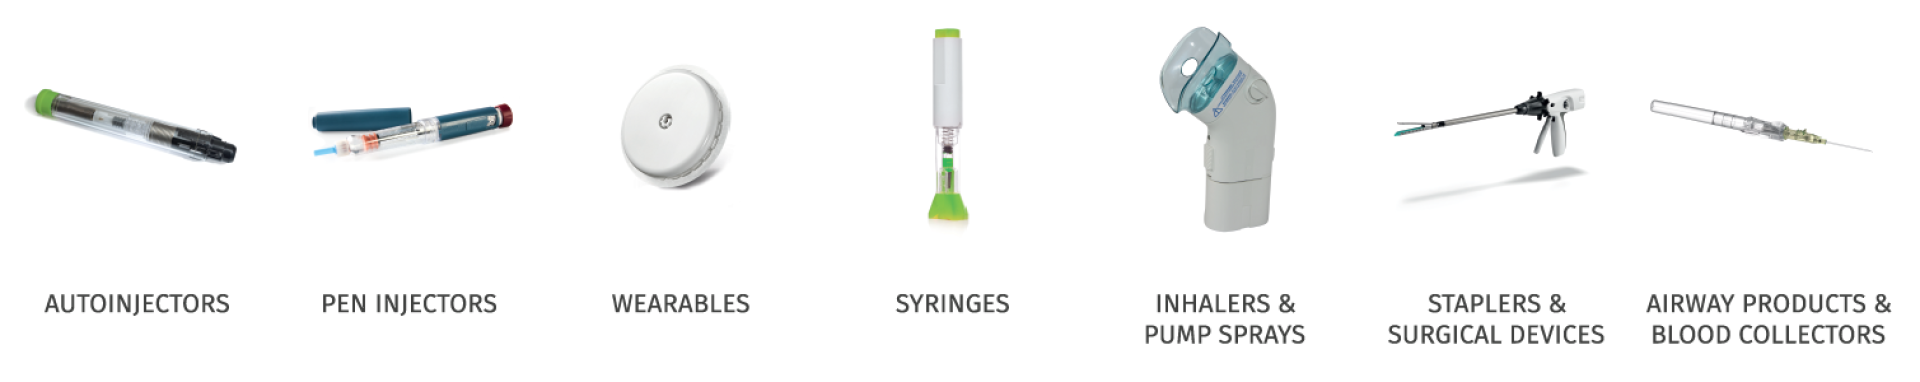 Spring applications in medical devices: autoinjectors, pen injectors, wearables, Syringes, Inhalers, Staplers, Surgical Devices, Airway products, Blood Collectors, Catheter